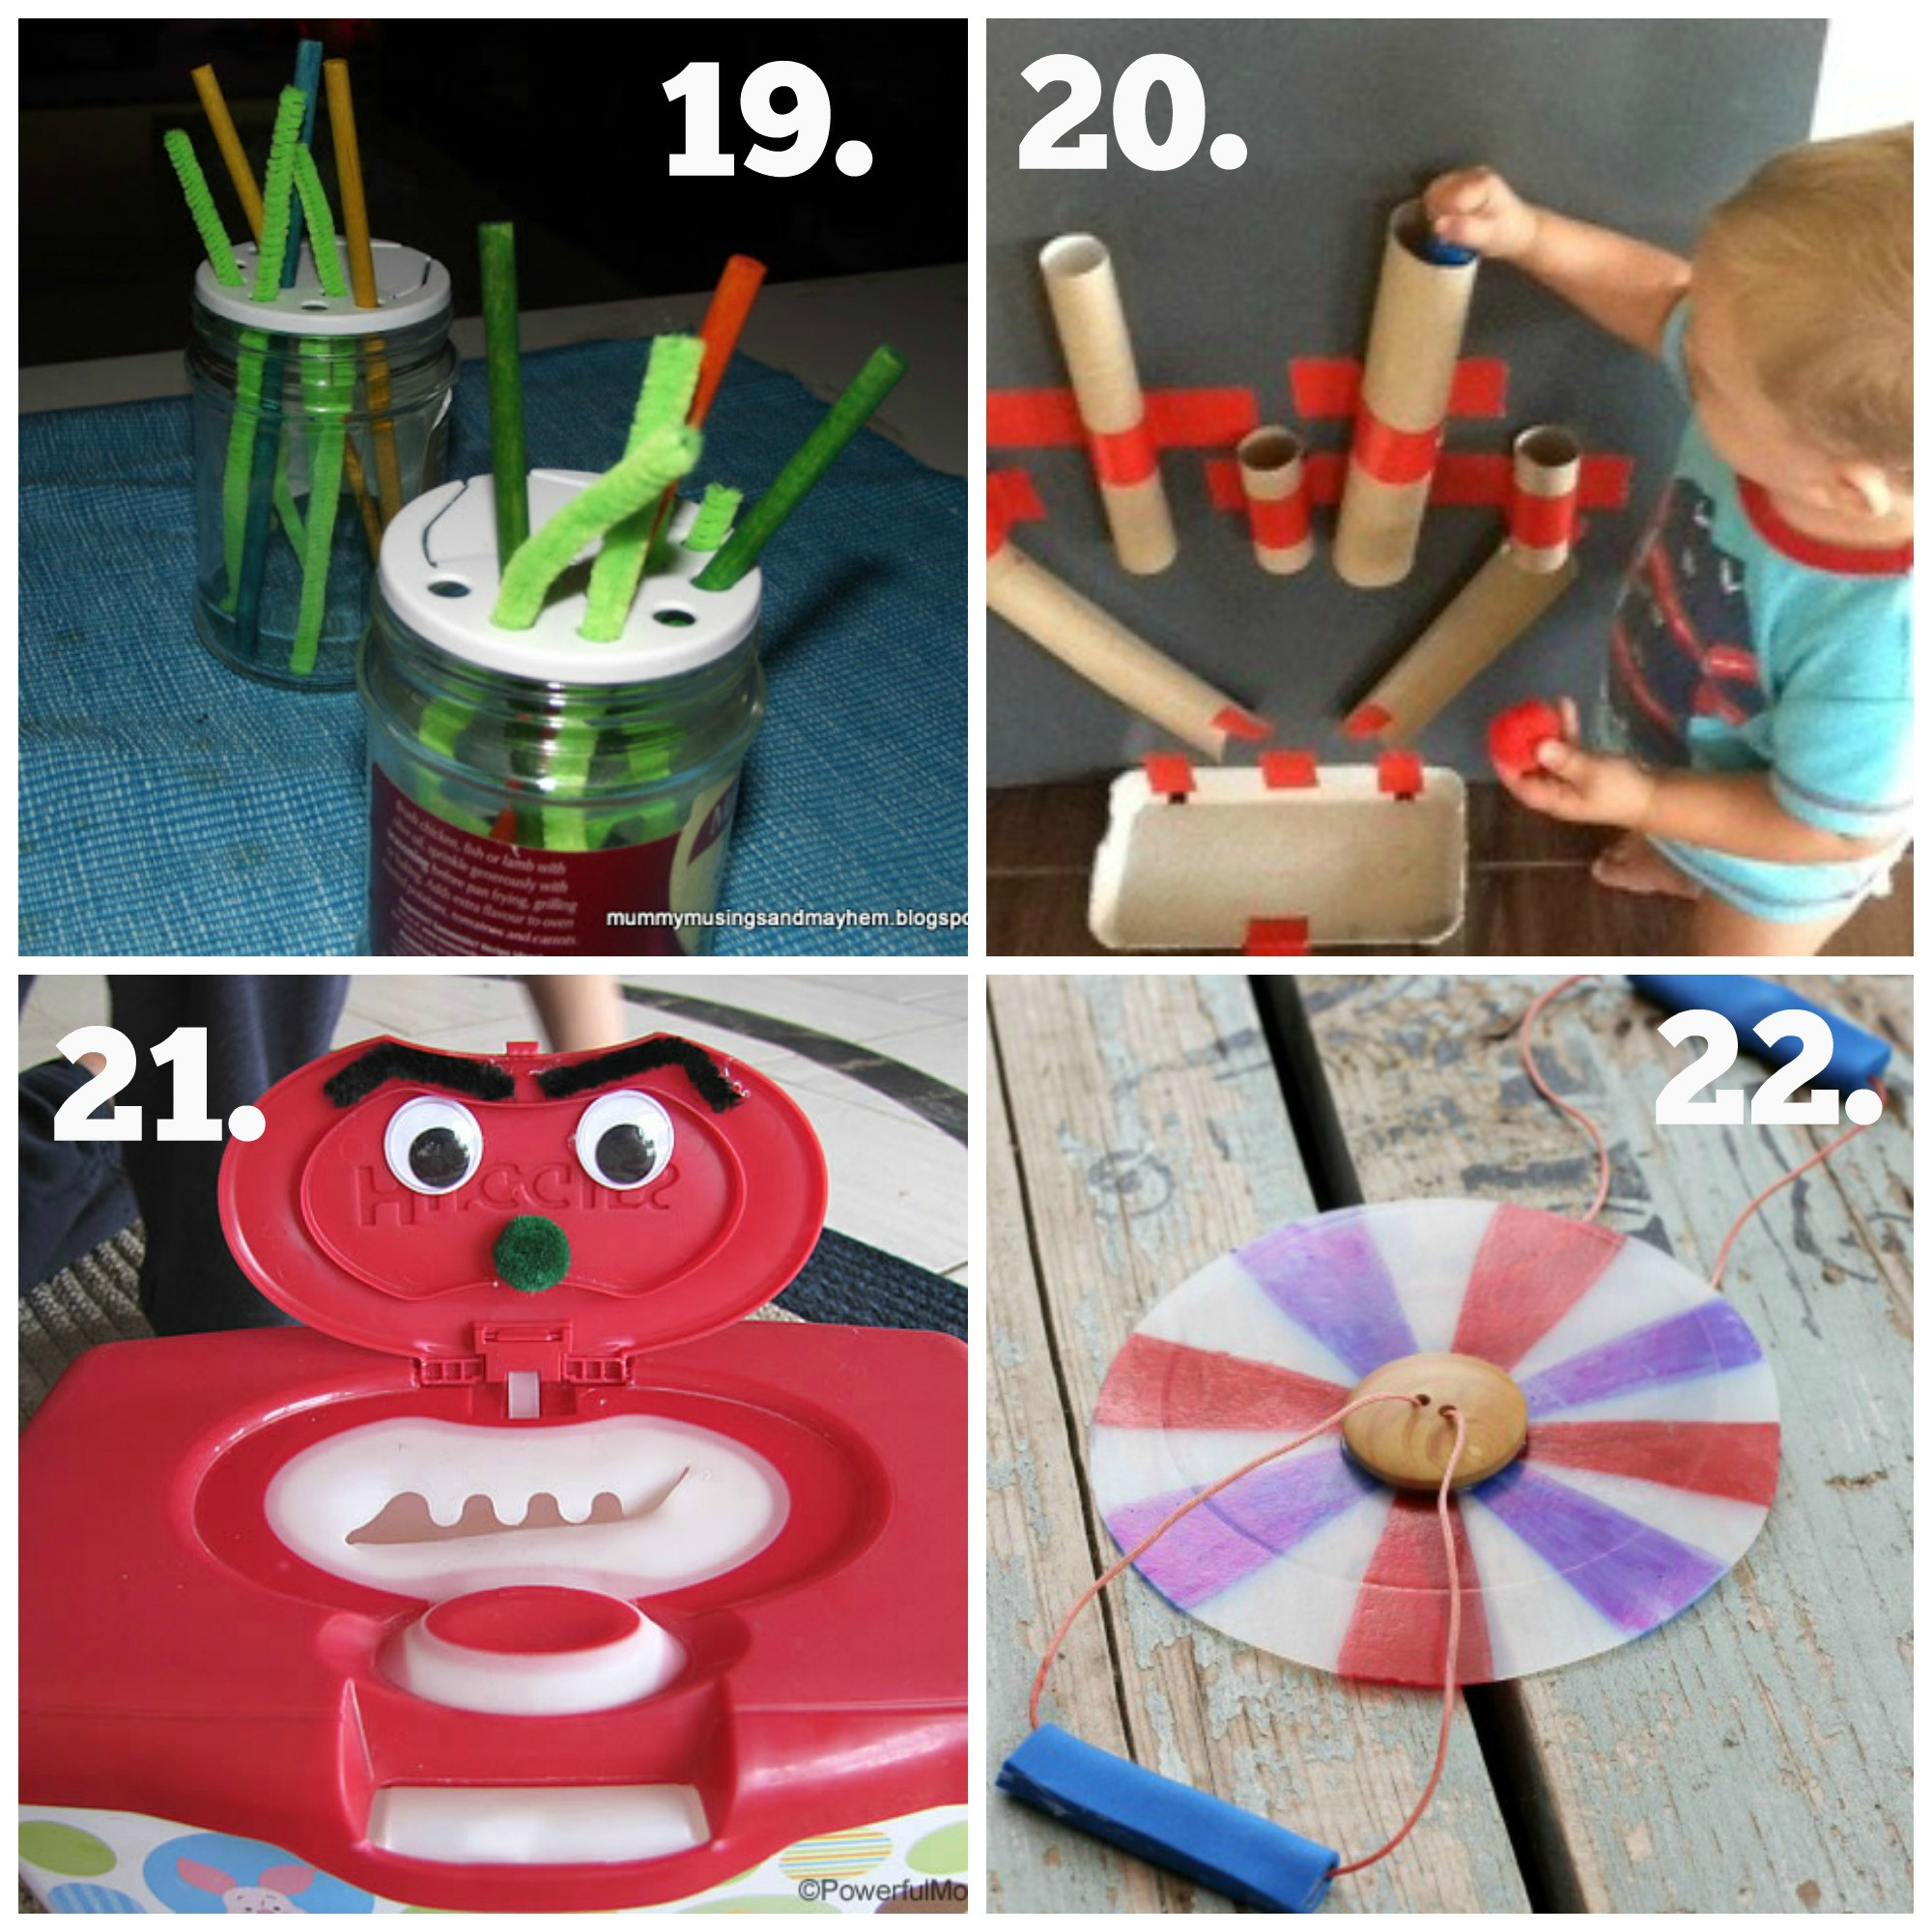 DIY Toddlers Toys
 Recycled Play Series DIY Baby & Toddler Toys The